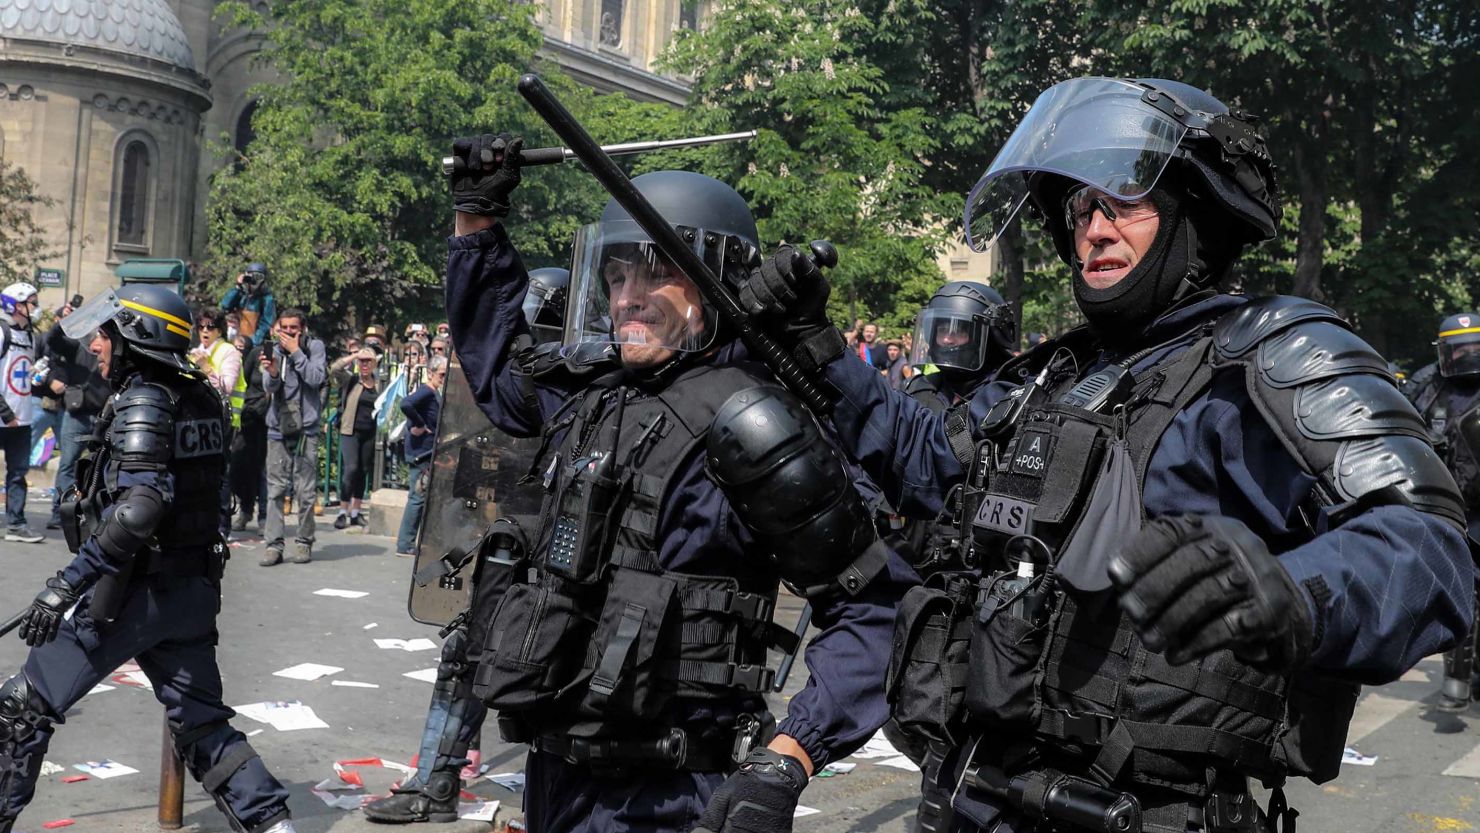 French riot police officers move forward as demonstrators rally in Montparnasse for May Day on Wednesday.